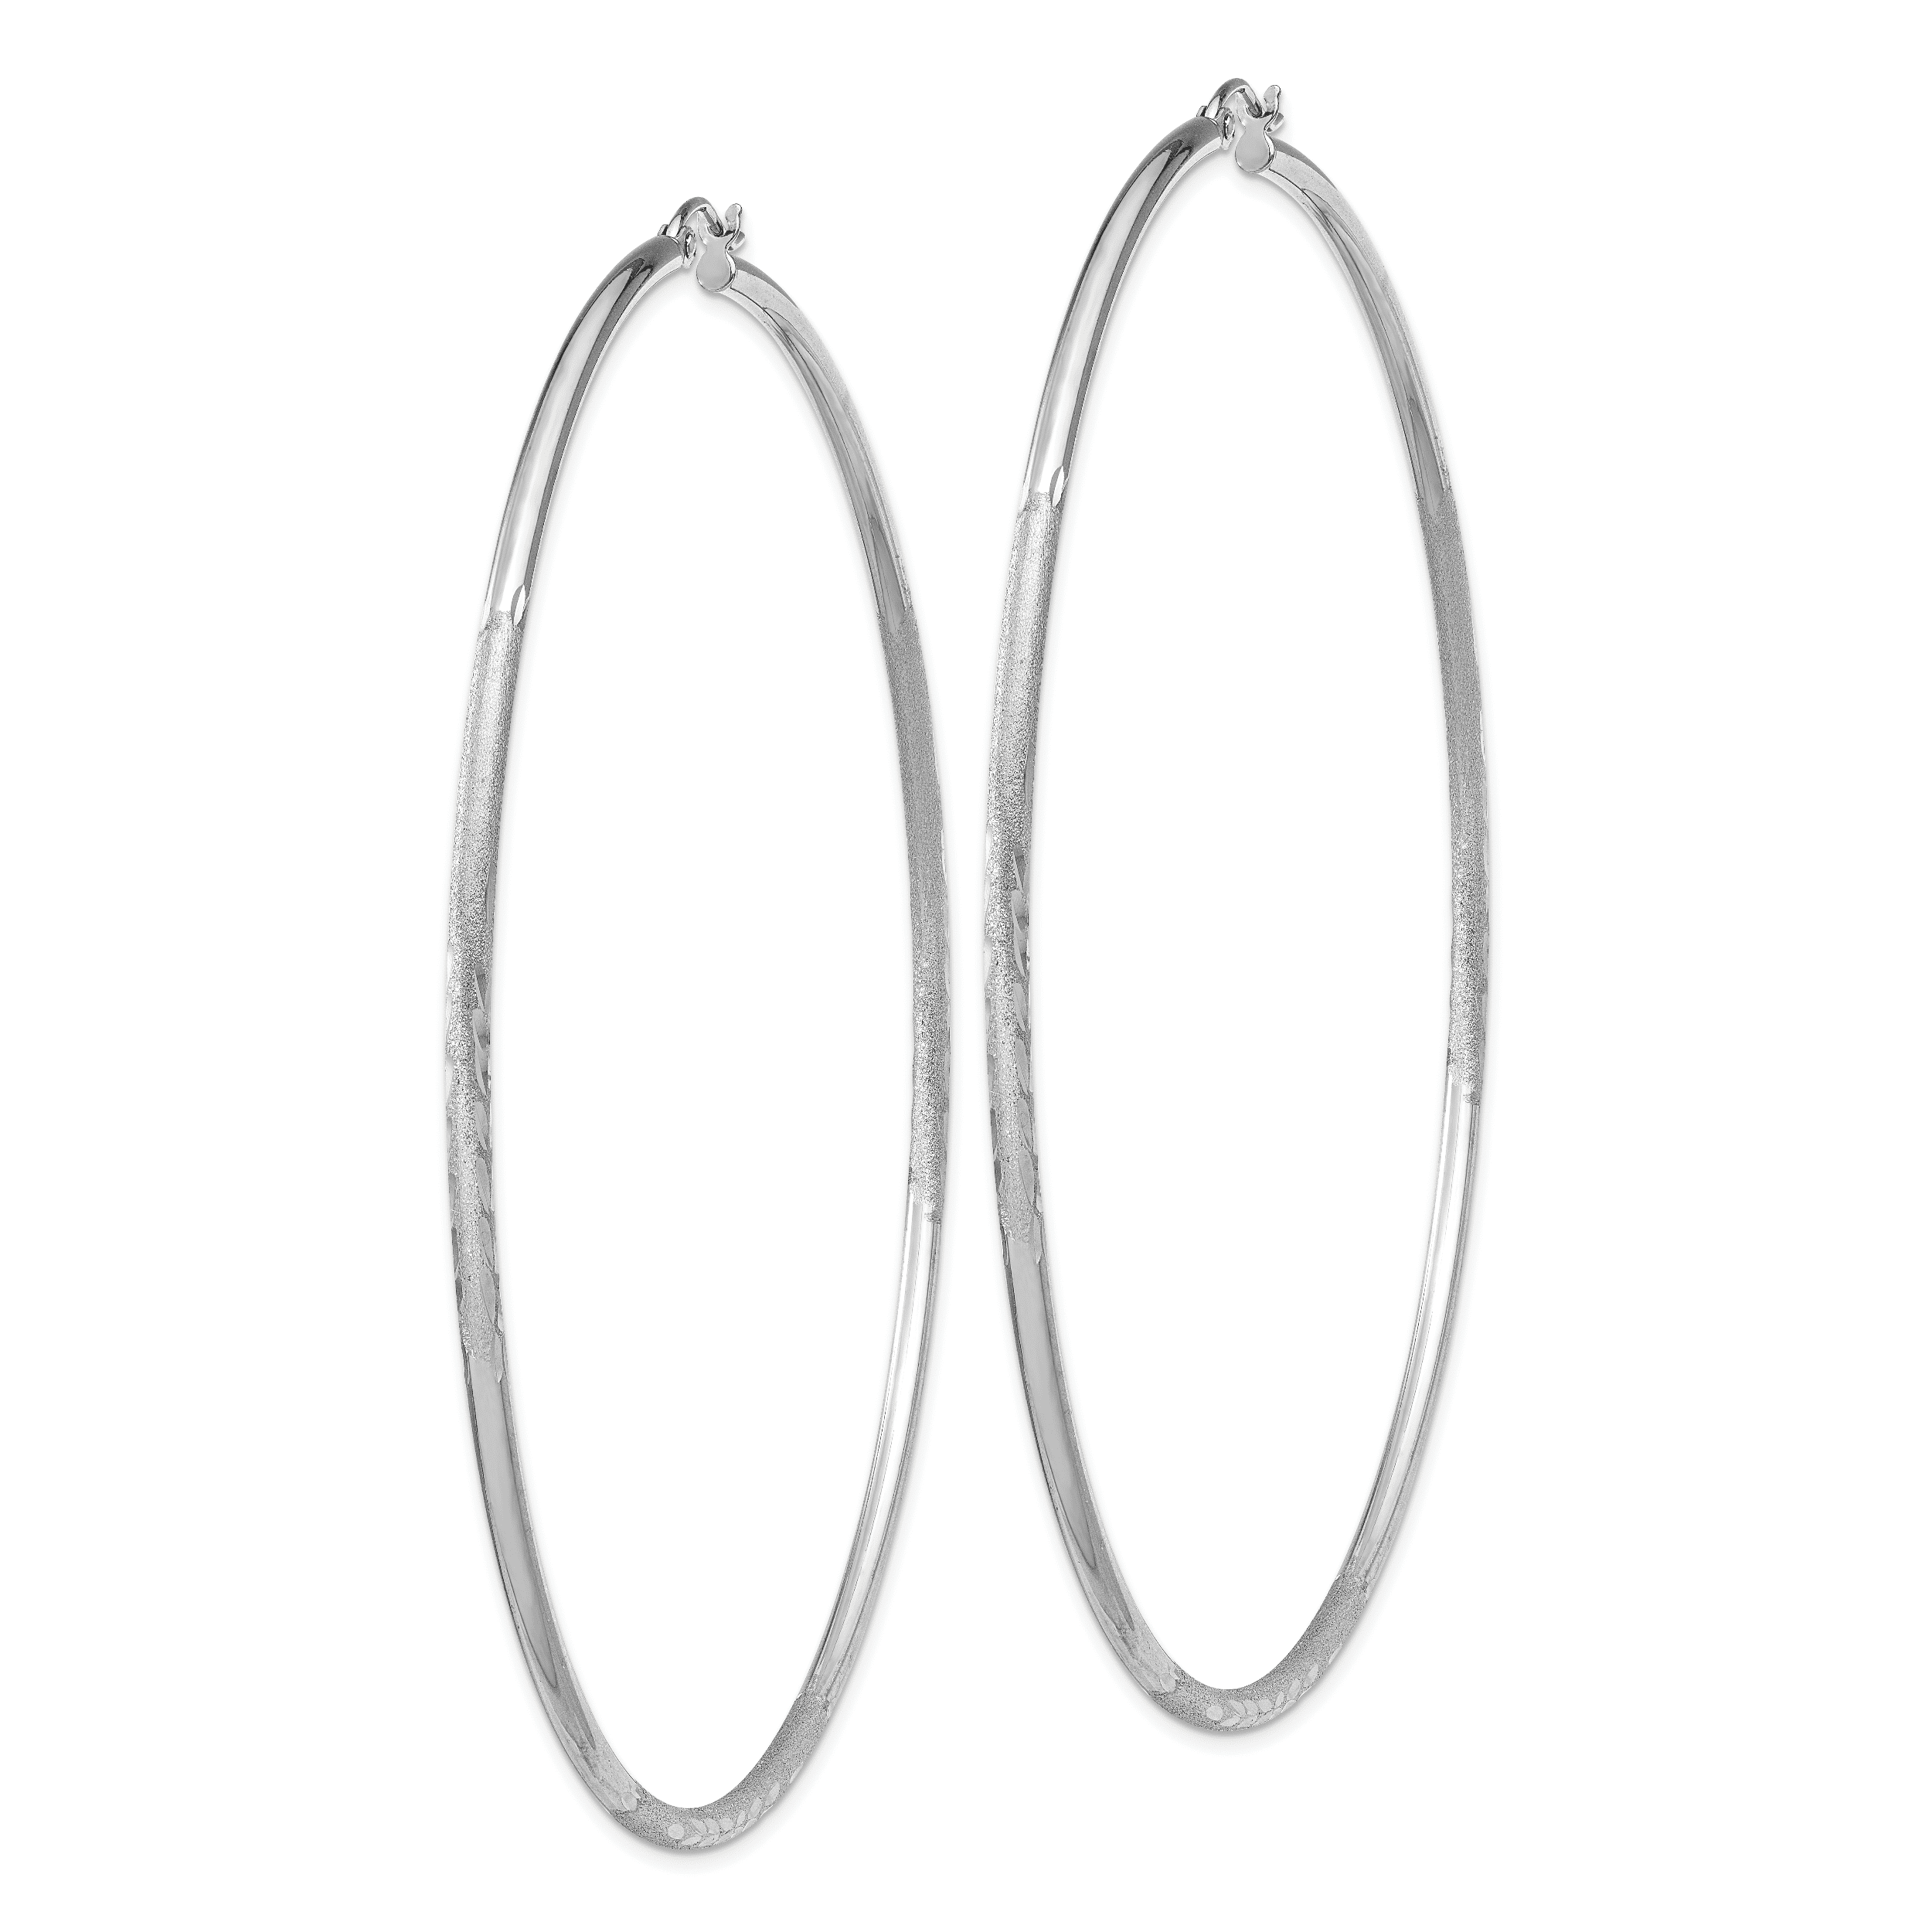 Details about   925 Sterling Silver Rhodium-plated 2mm Satin & Diamond Cut Hoop Earrings